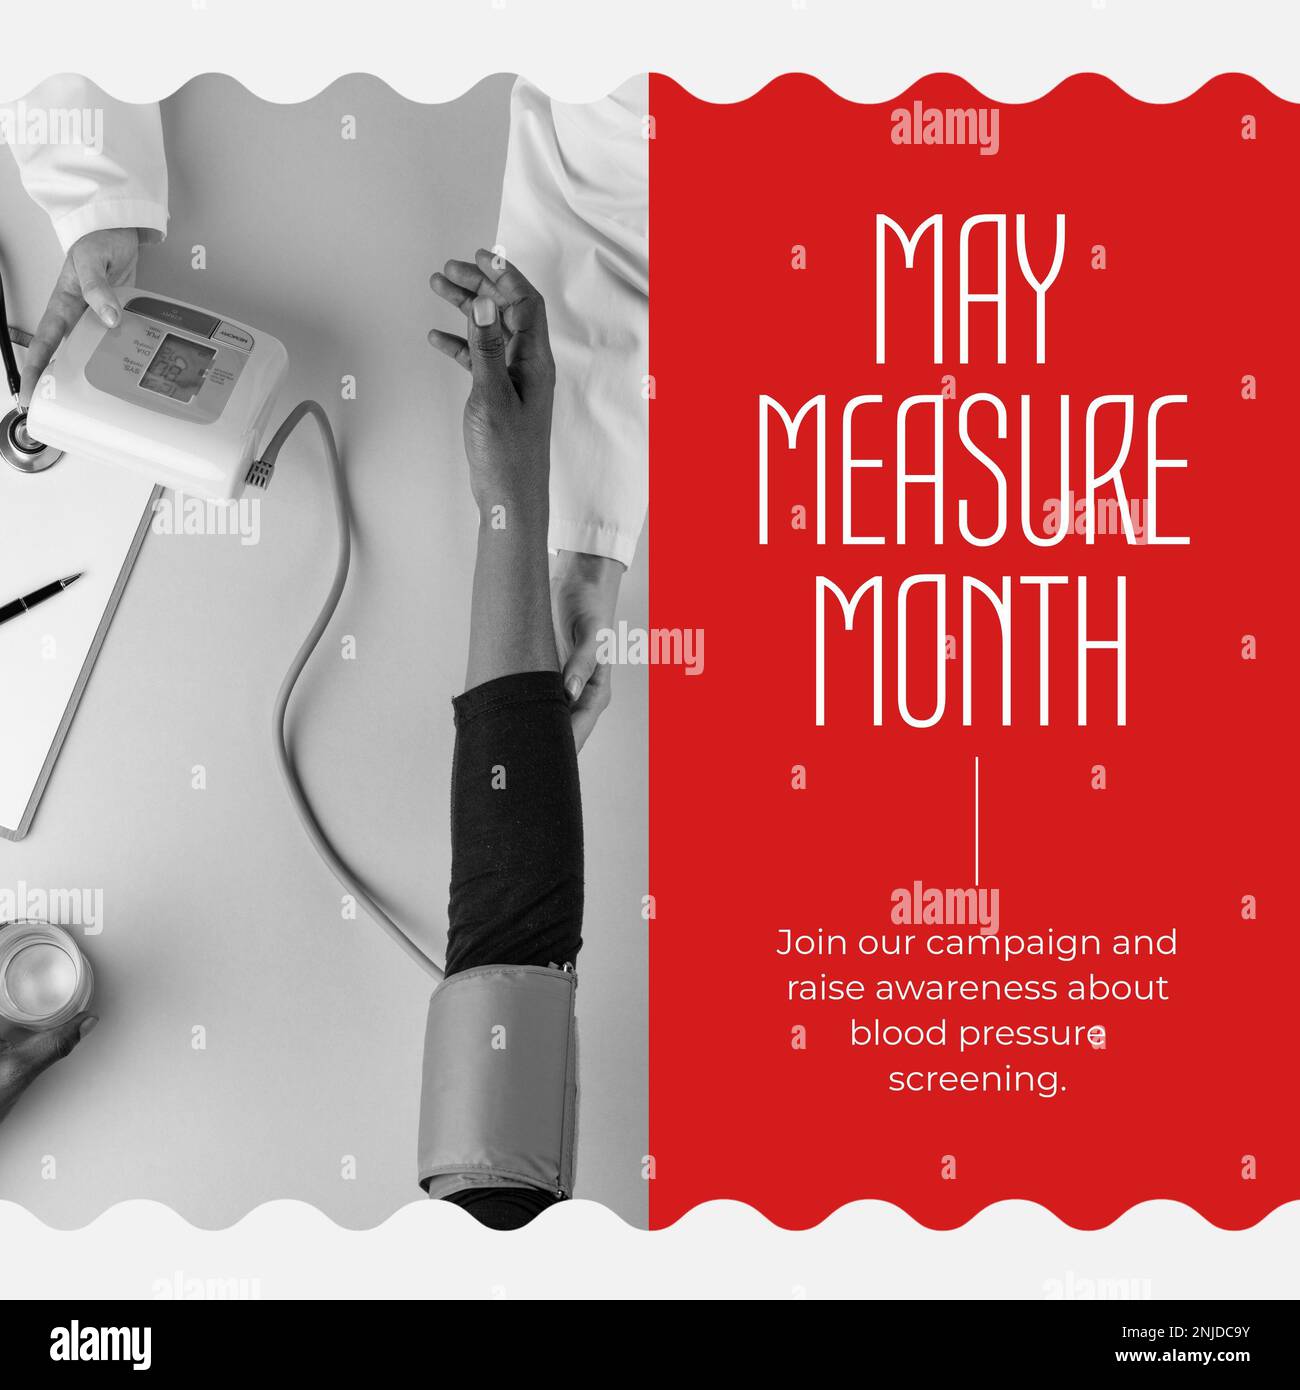 Composition of may measurement month text over woman measuring blood pressure Stock Photo